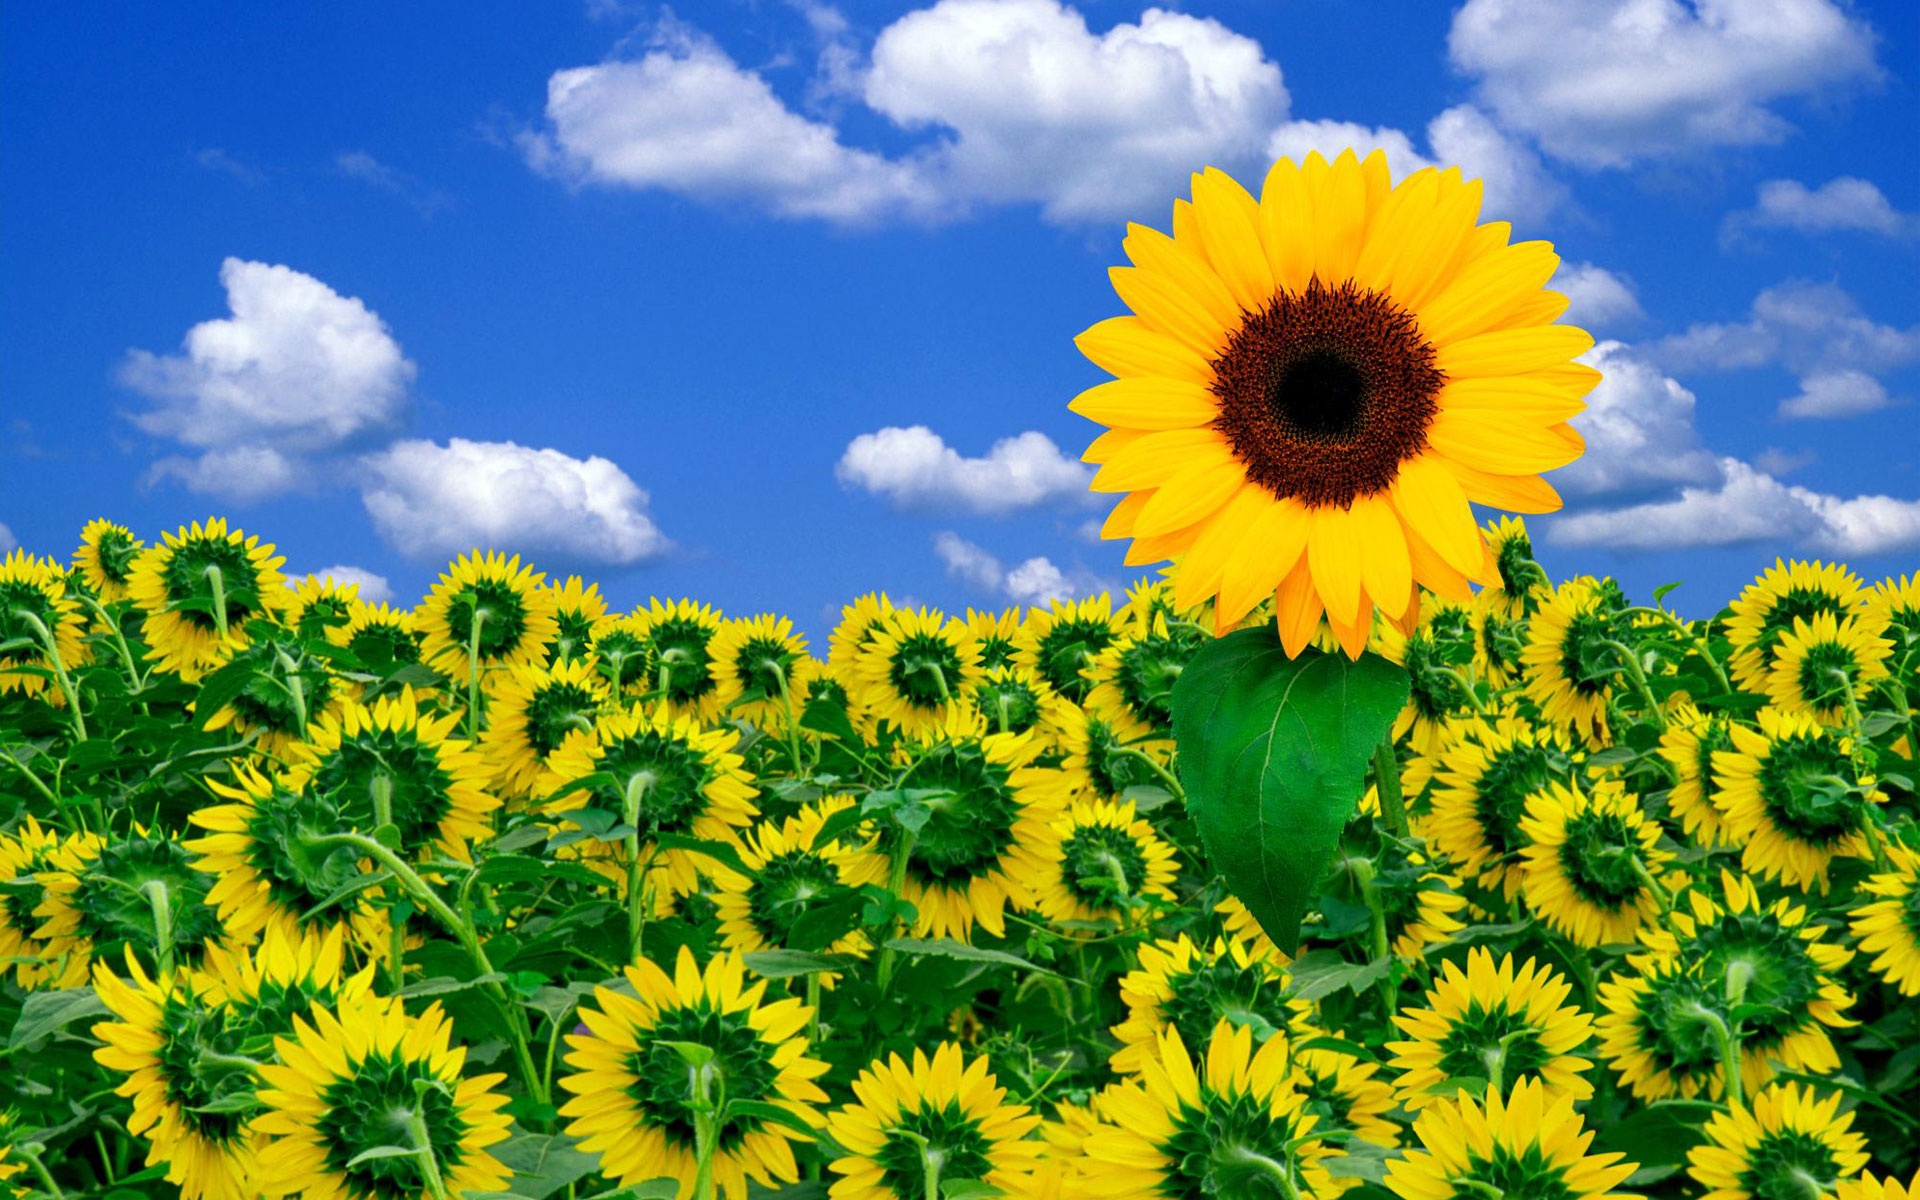 Wallpapers sunflower sky clouds on the desktop